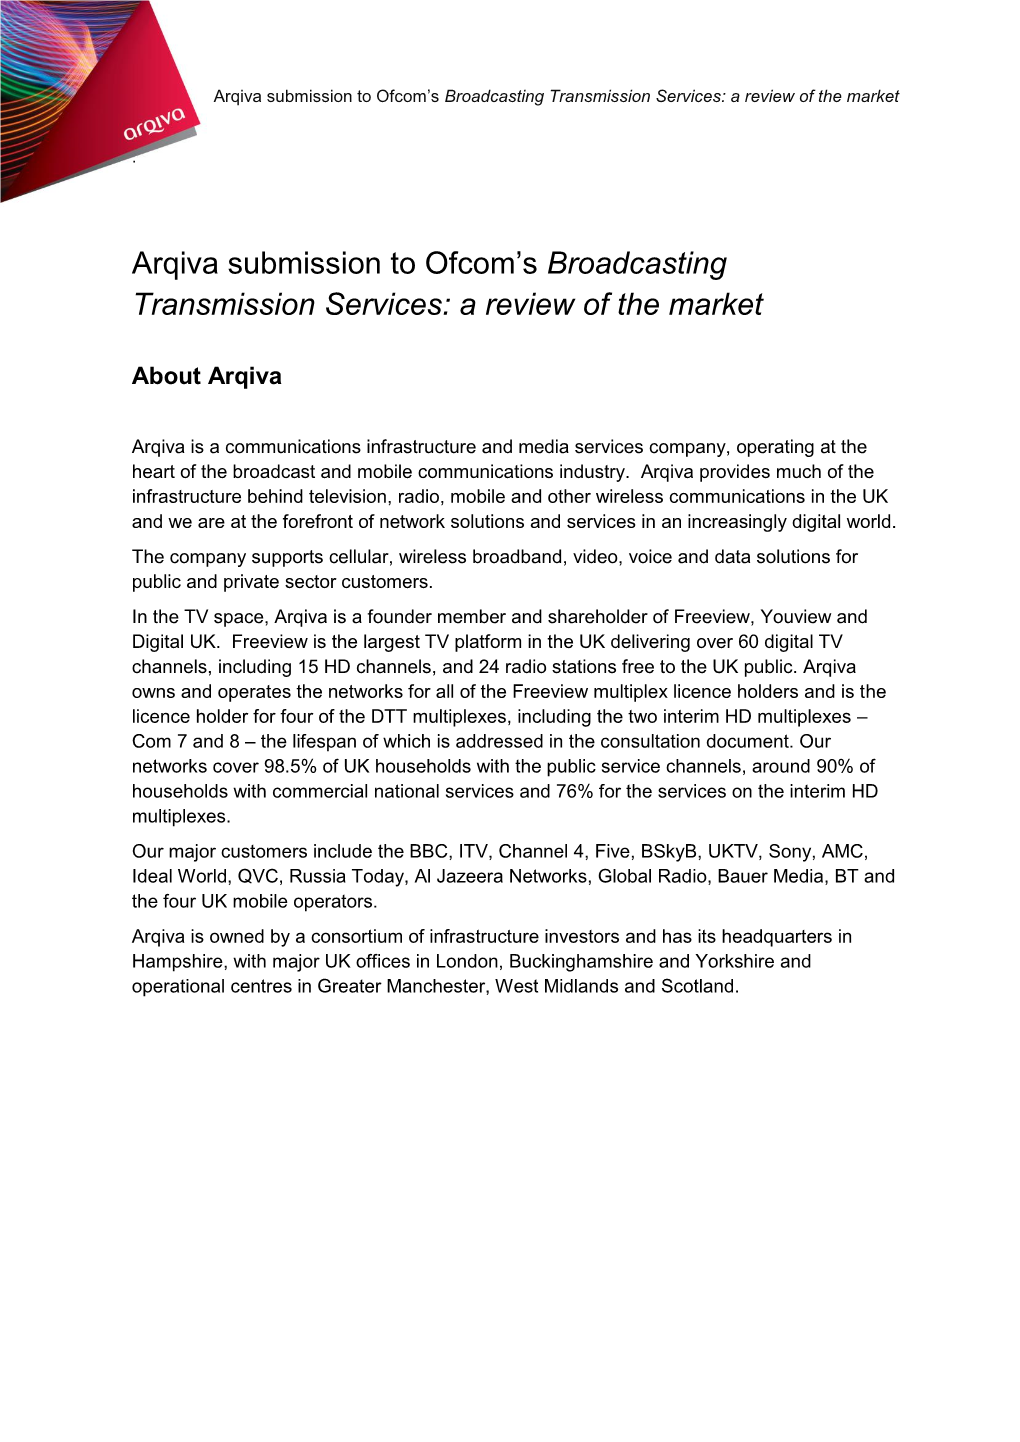 Arqiva Submission to Ofcom's Broadcasting Transmission Services